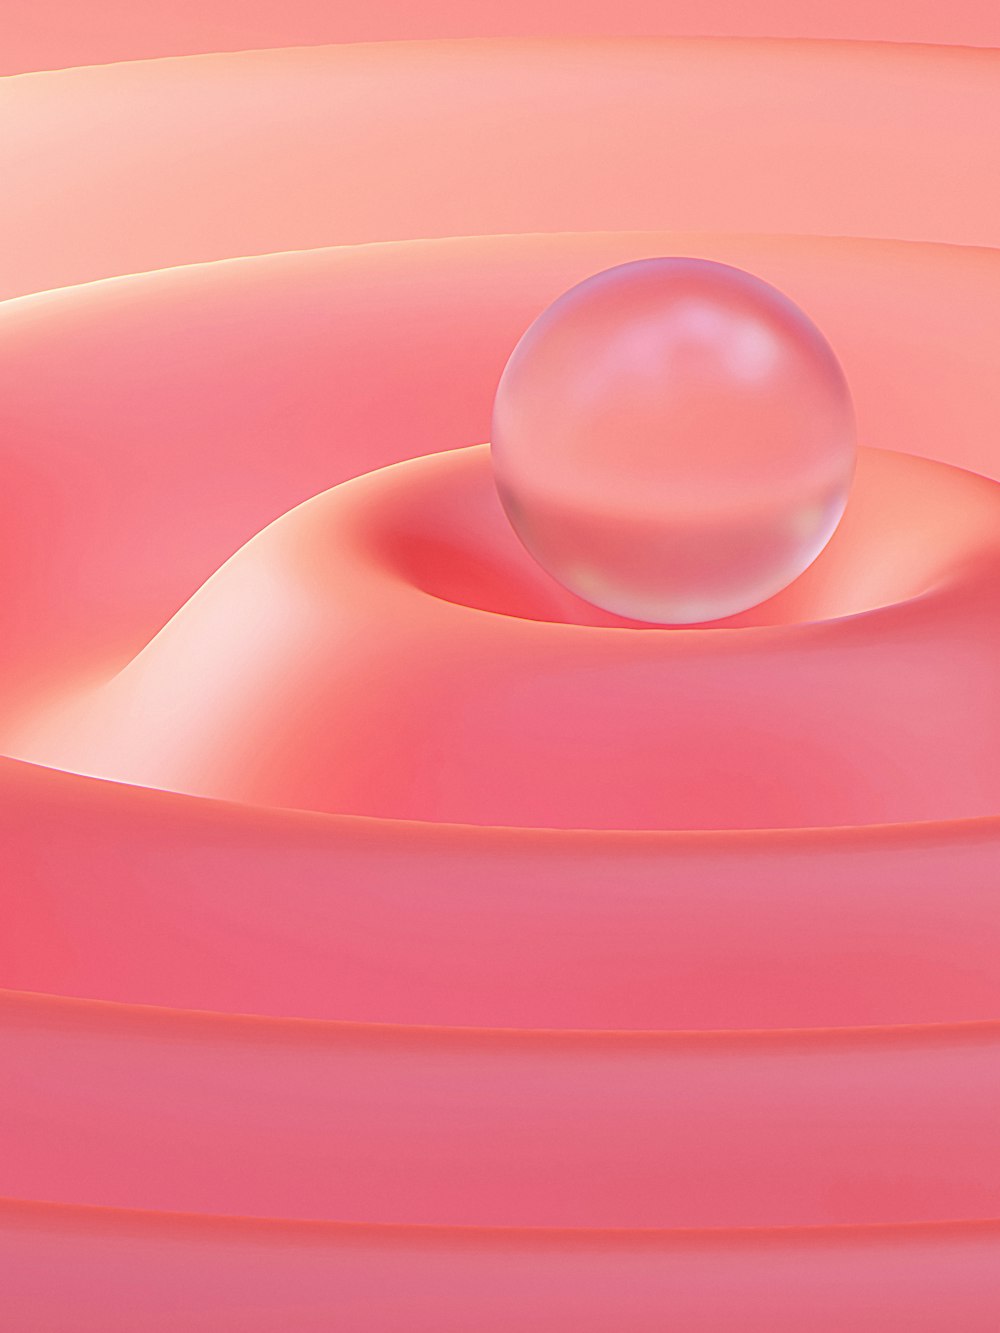 a white ball floating in a pink liquid